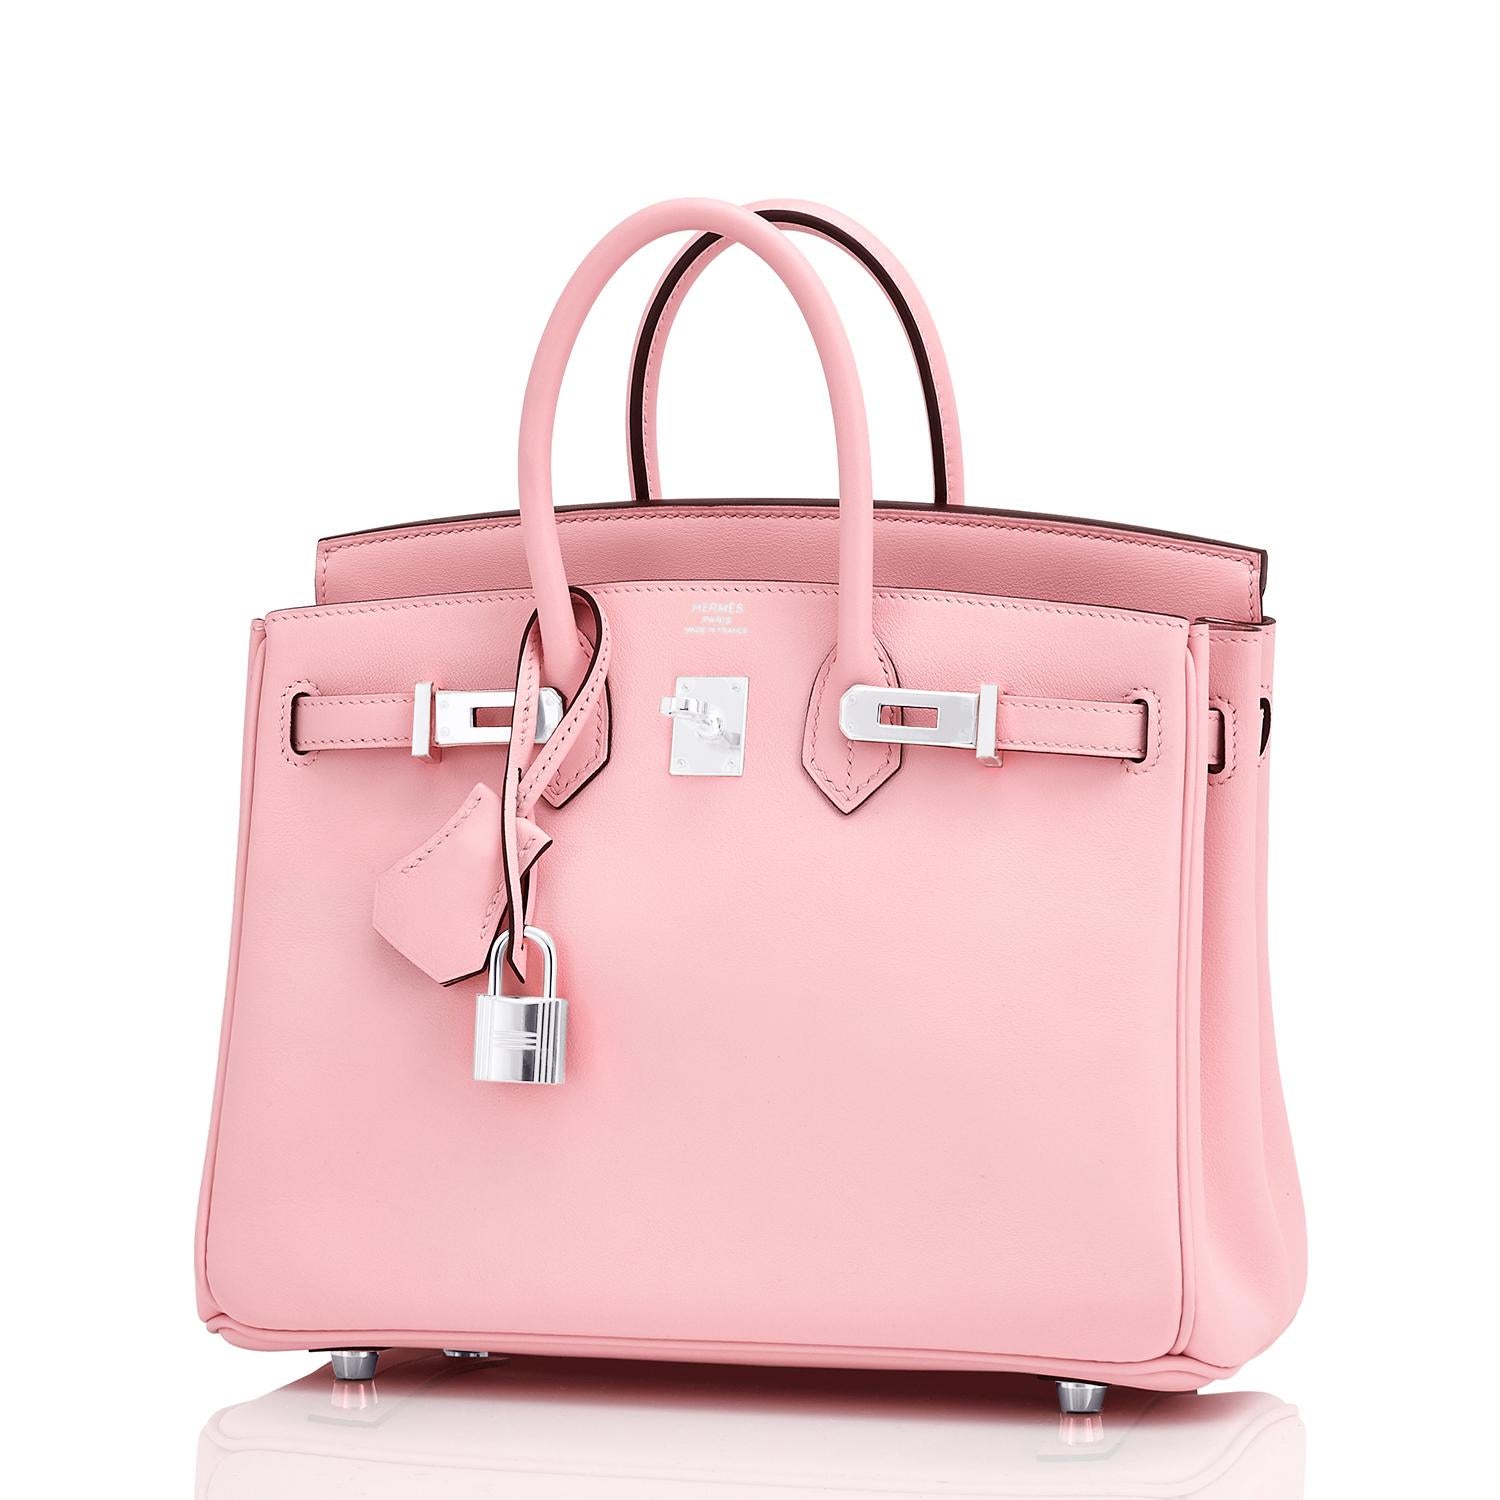 Hermes Rose Sakura Birkin 25 Pink Jewel Bag Grail Z Stamp, 2021
Don't miss this most precious and coveted Hermes Birkin of all time!
Just purchased from Hermes store; bag bears new interior 2021 Z Stamp.
Brand New in Box. Store Fresh.  Pristine